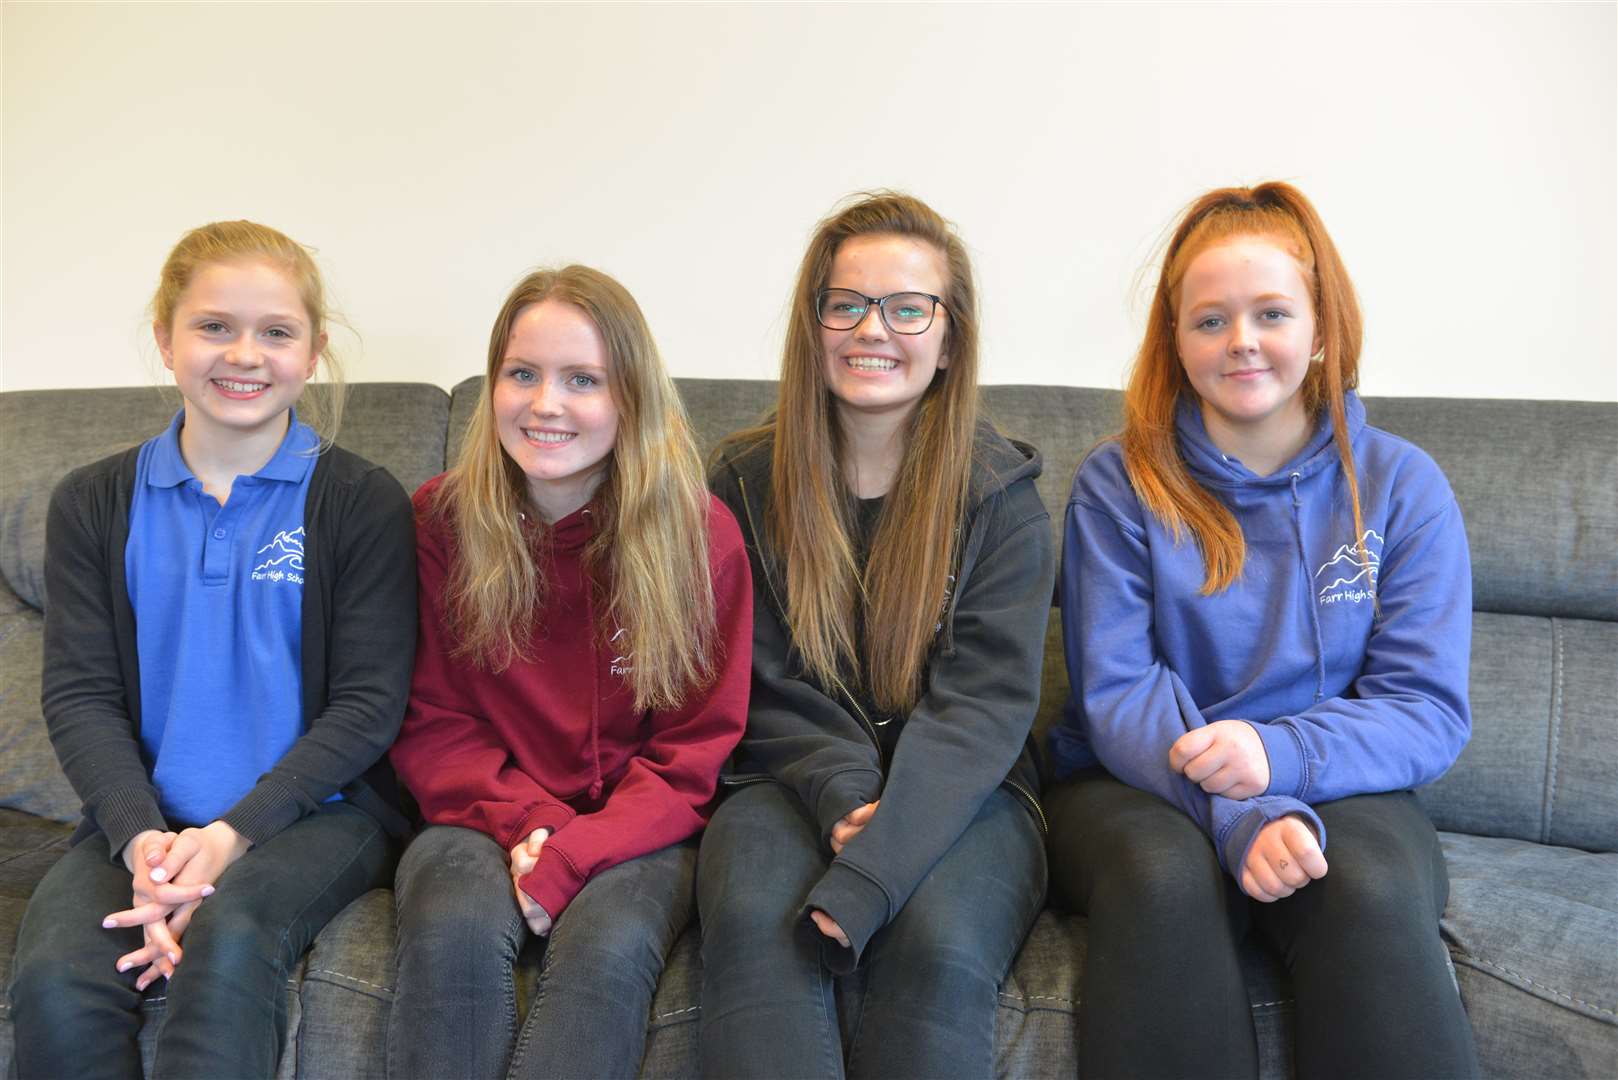 From left, Farr High School’s top scoring S5 pupils – Alex Mackay, Portskerra, who hopes to study medicine; Lauren Mowatt, Portskerra, who is unsure of her future destination though it may include music; Mollie O’Brien, Melvich, who may aim for golf management and Erin Gunn, who is considering primary teaching.